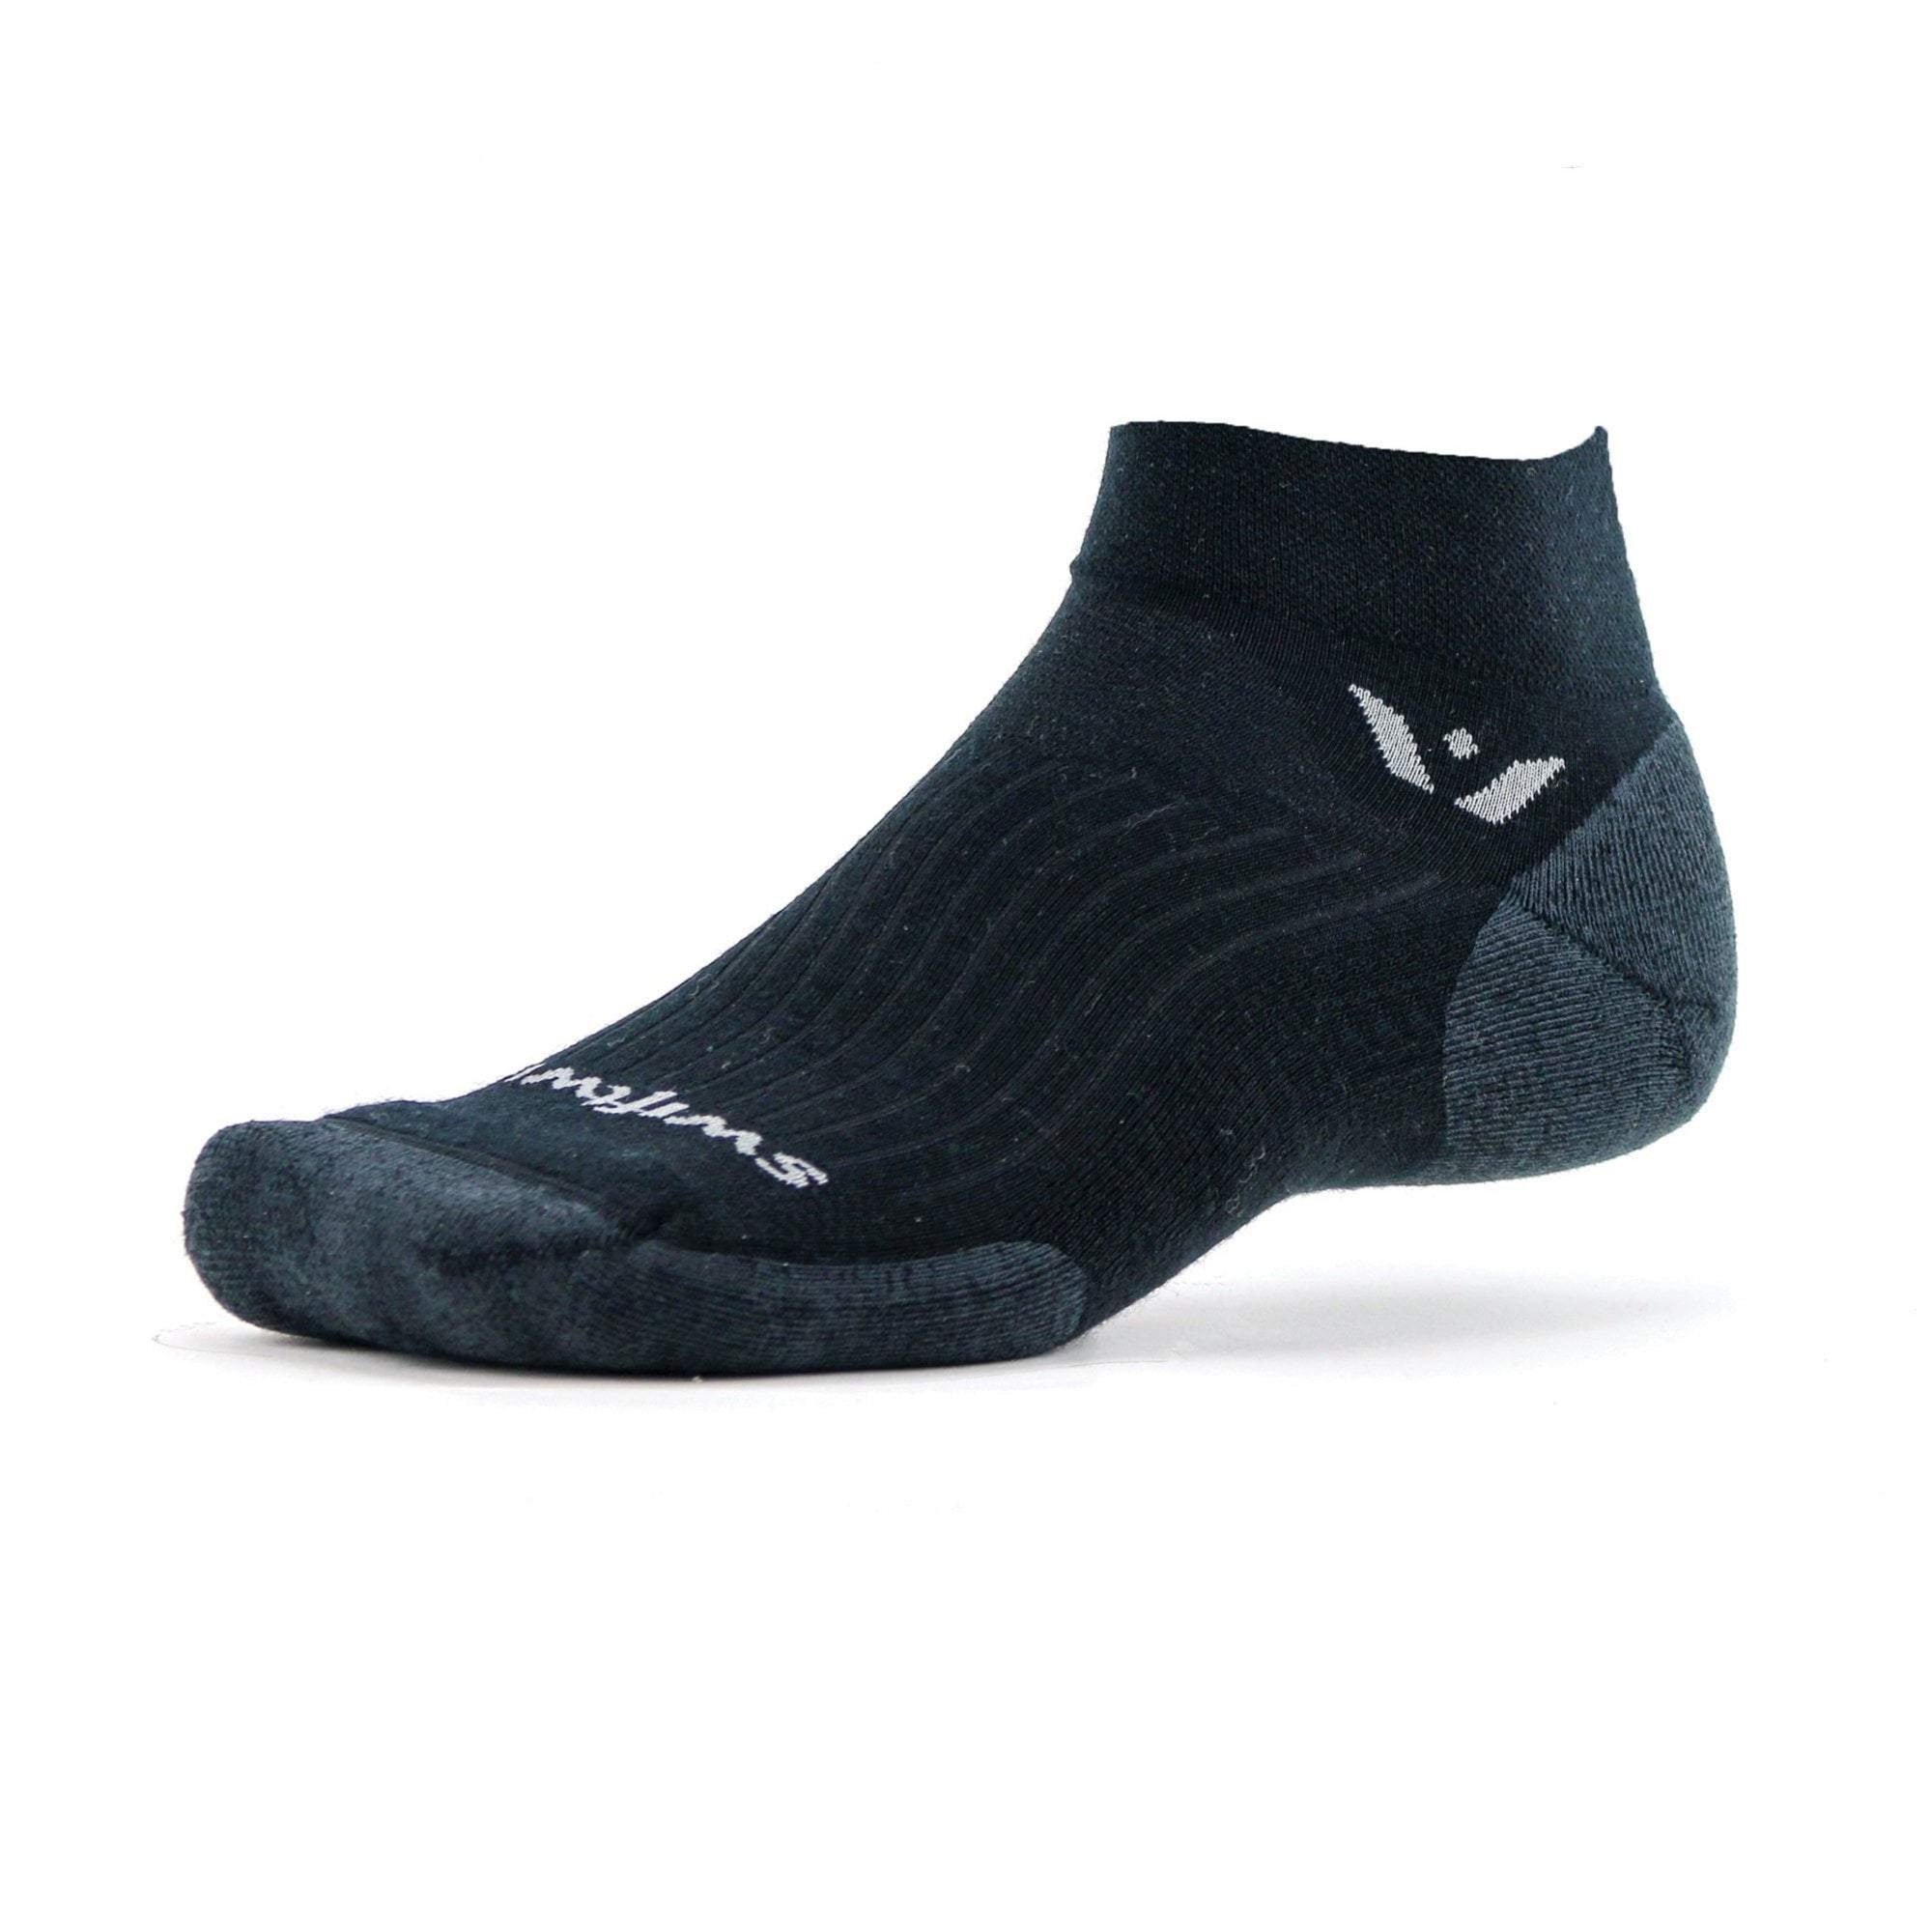 Pursuit one 1''sock in black